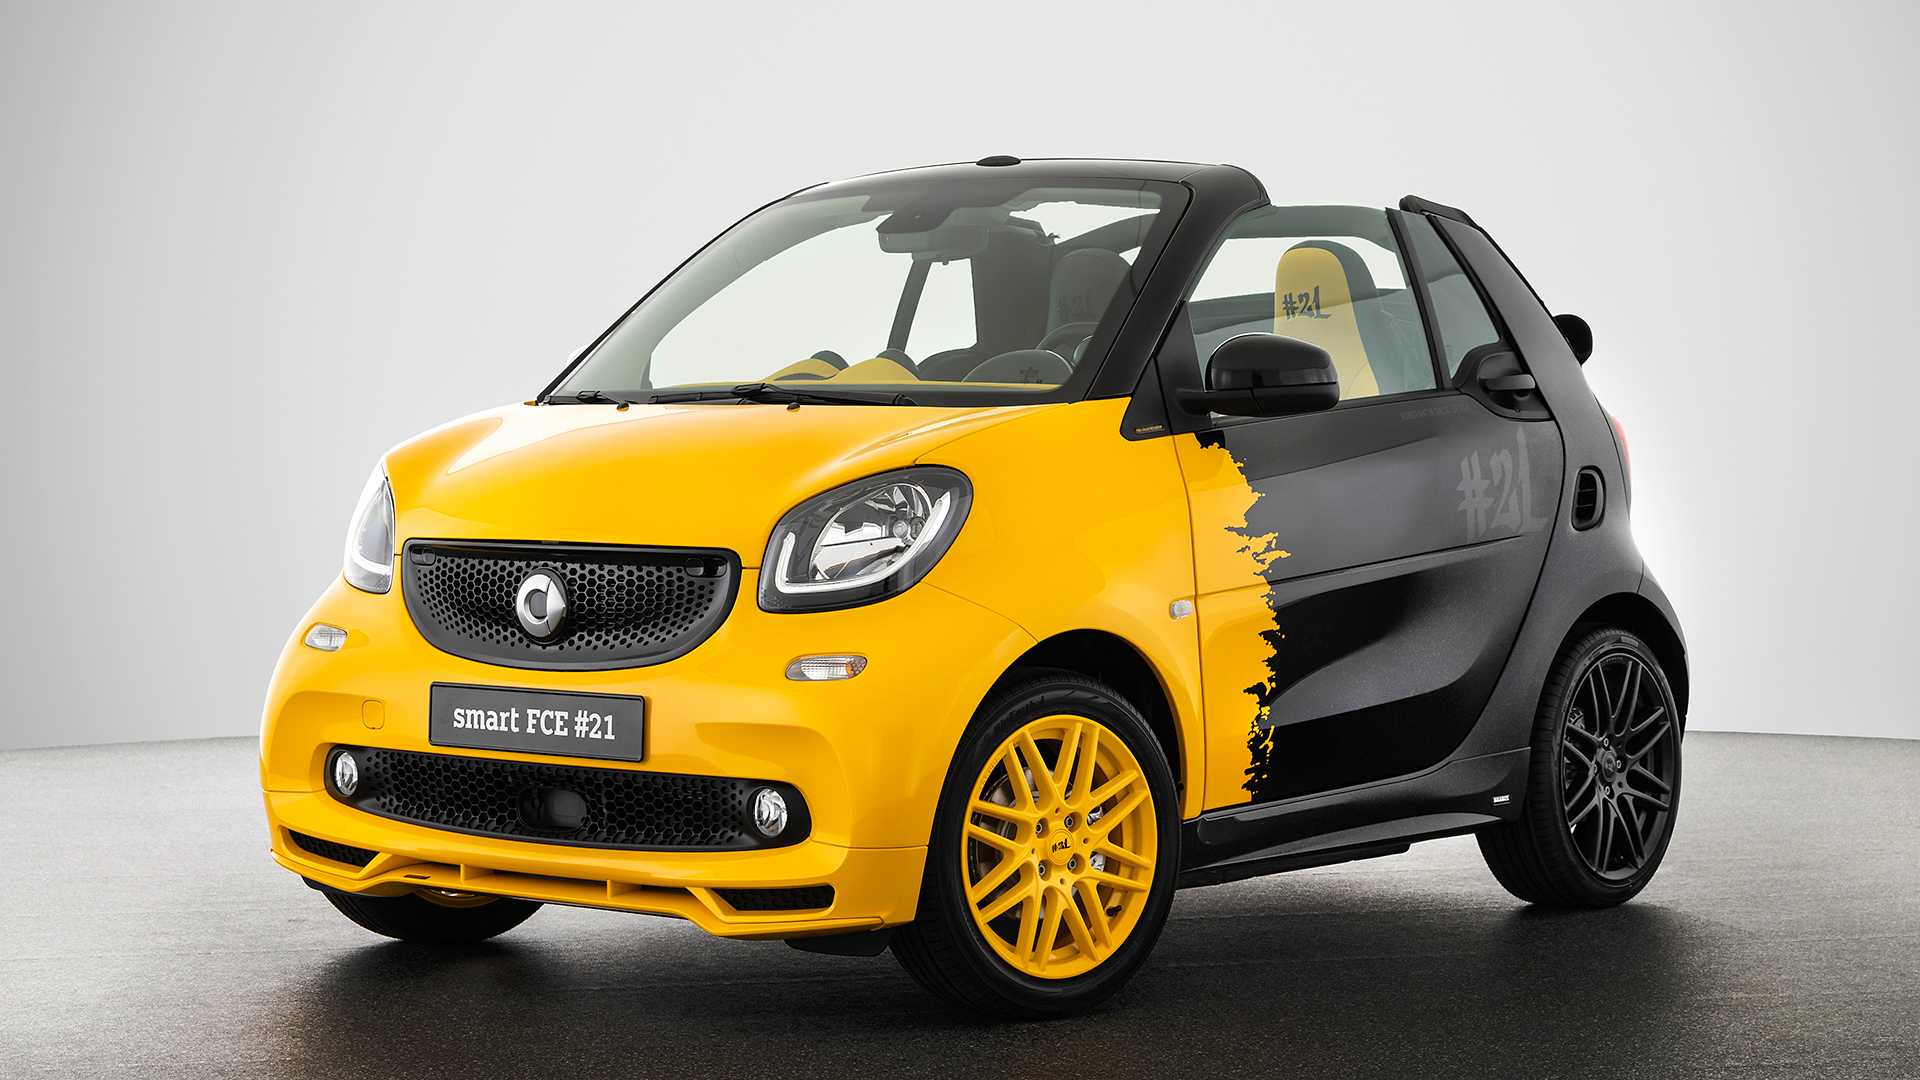 smart fortwo Final Collector‘s Edition by Konstantin Grcic